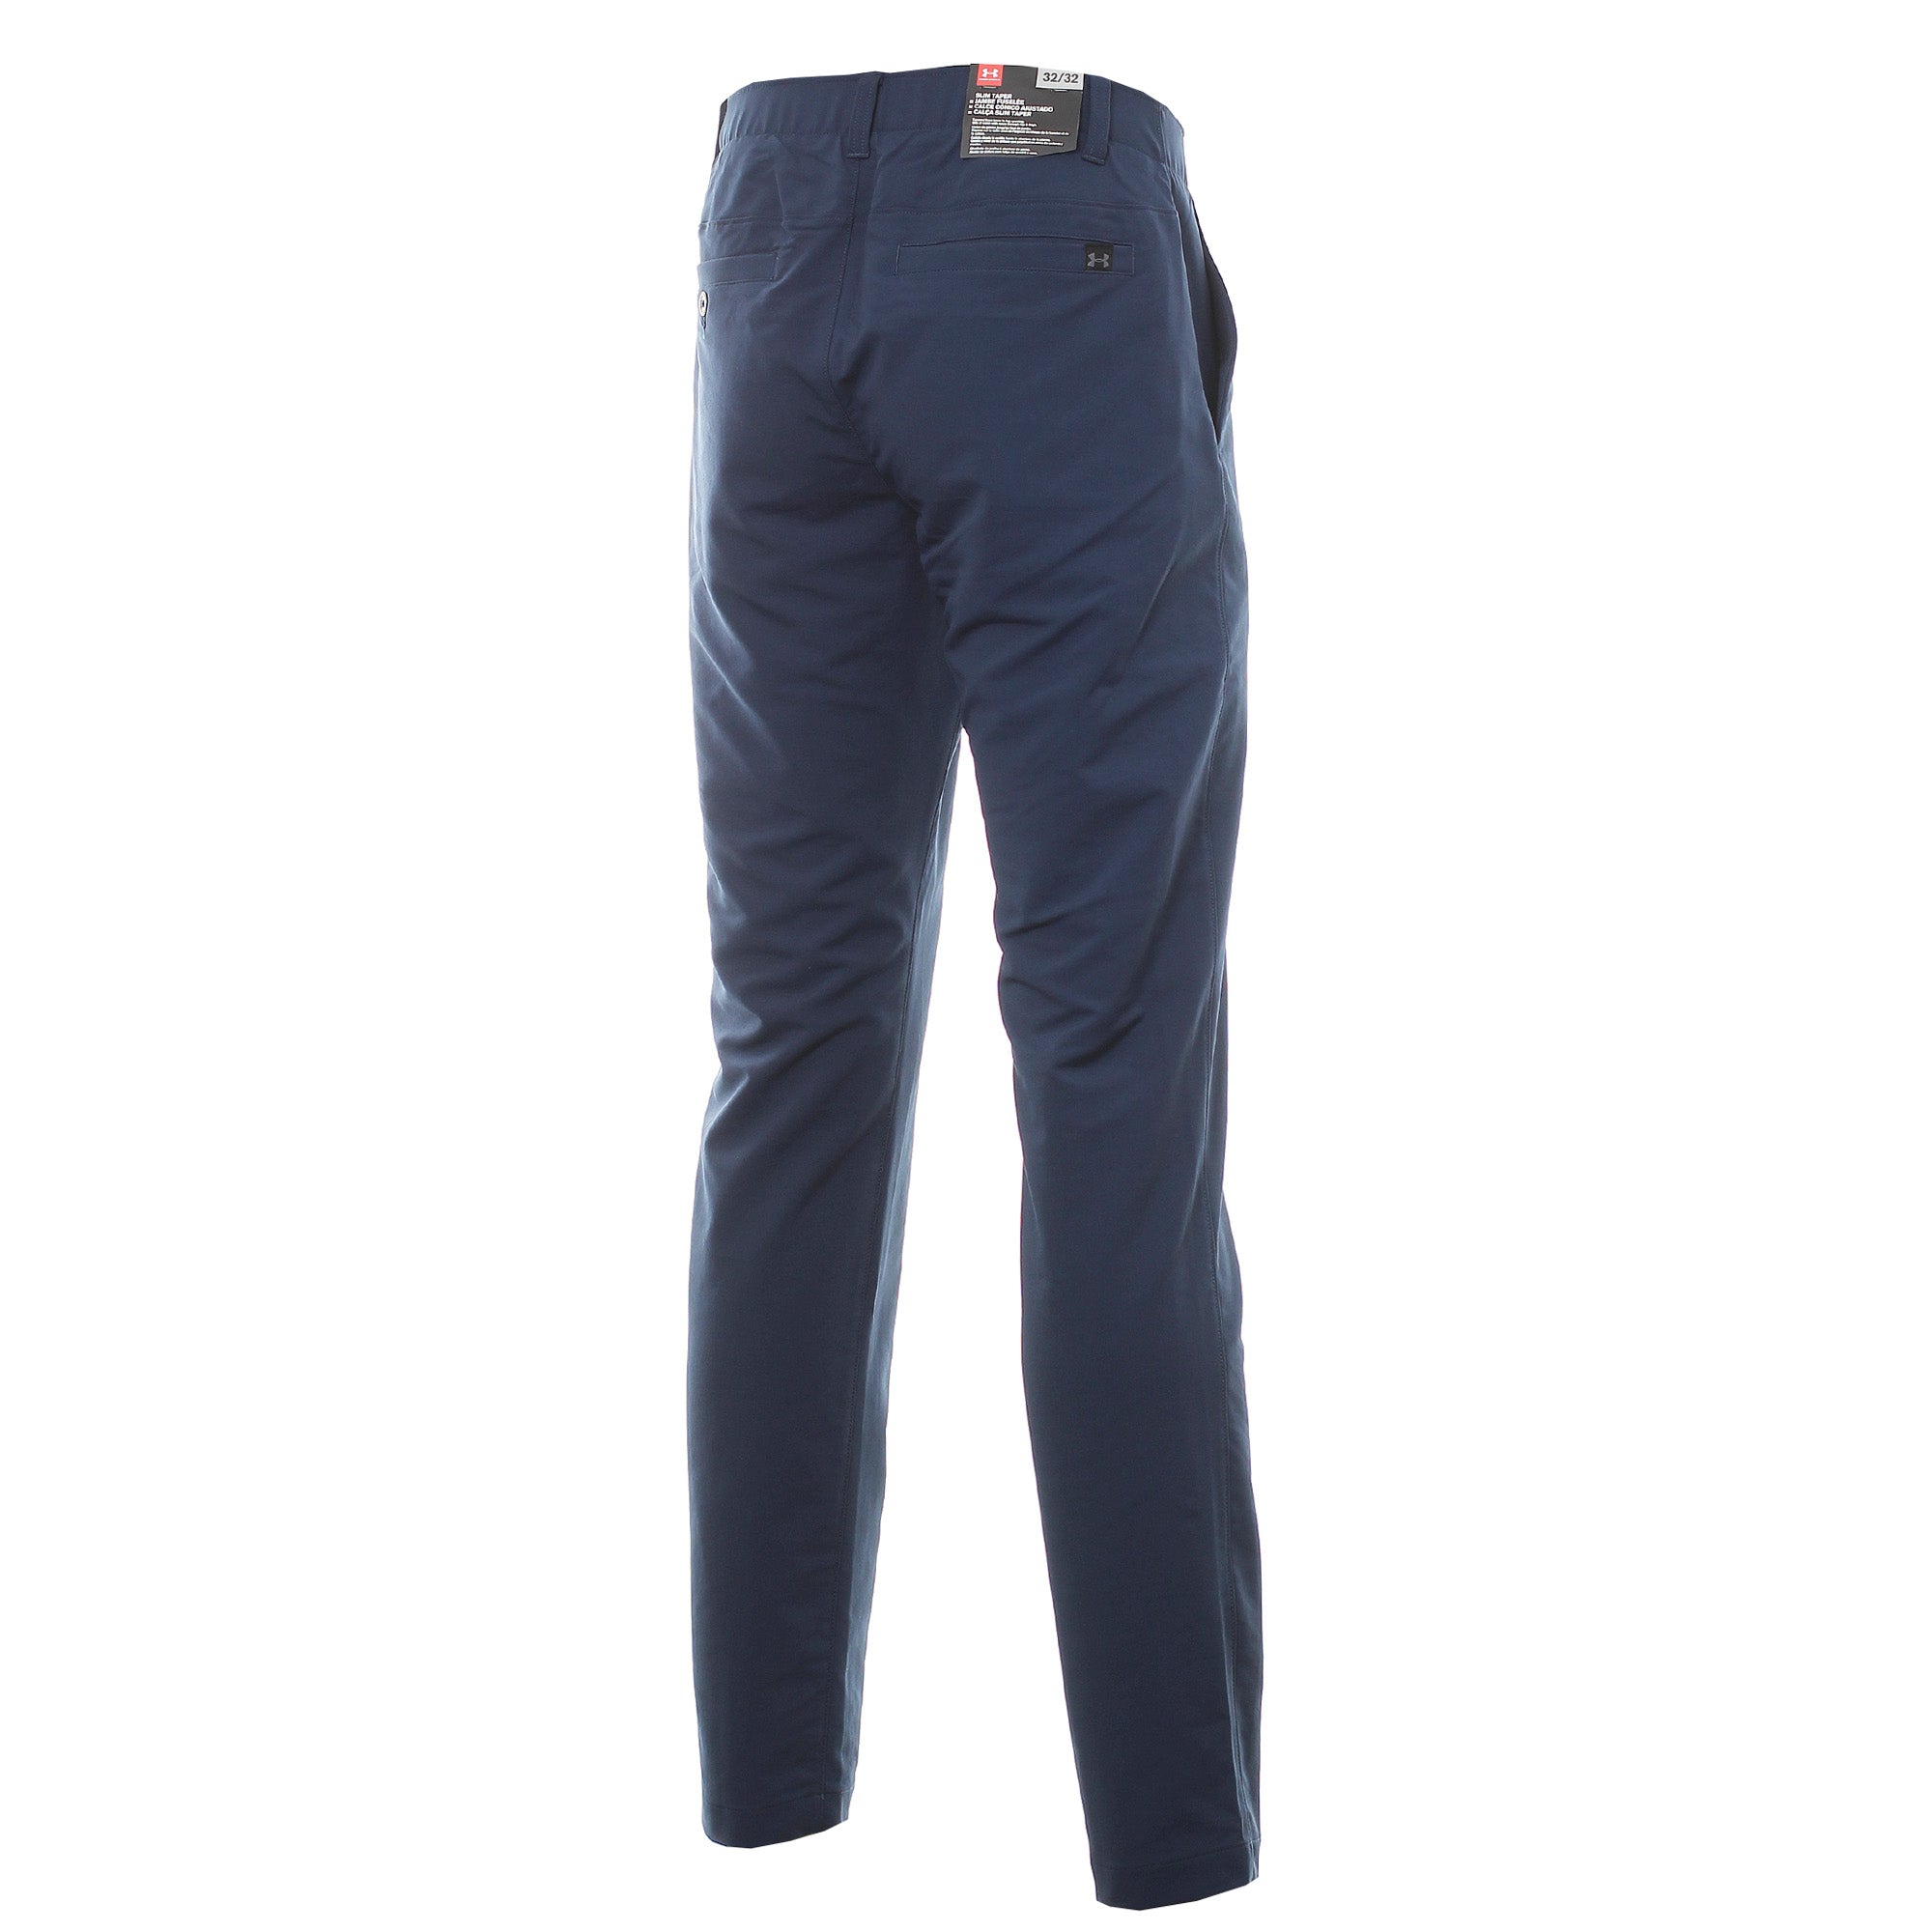 tapered mens golf pants